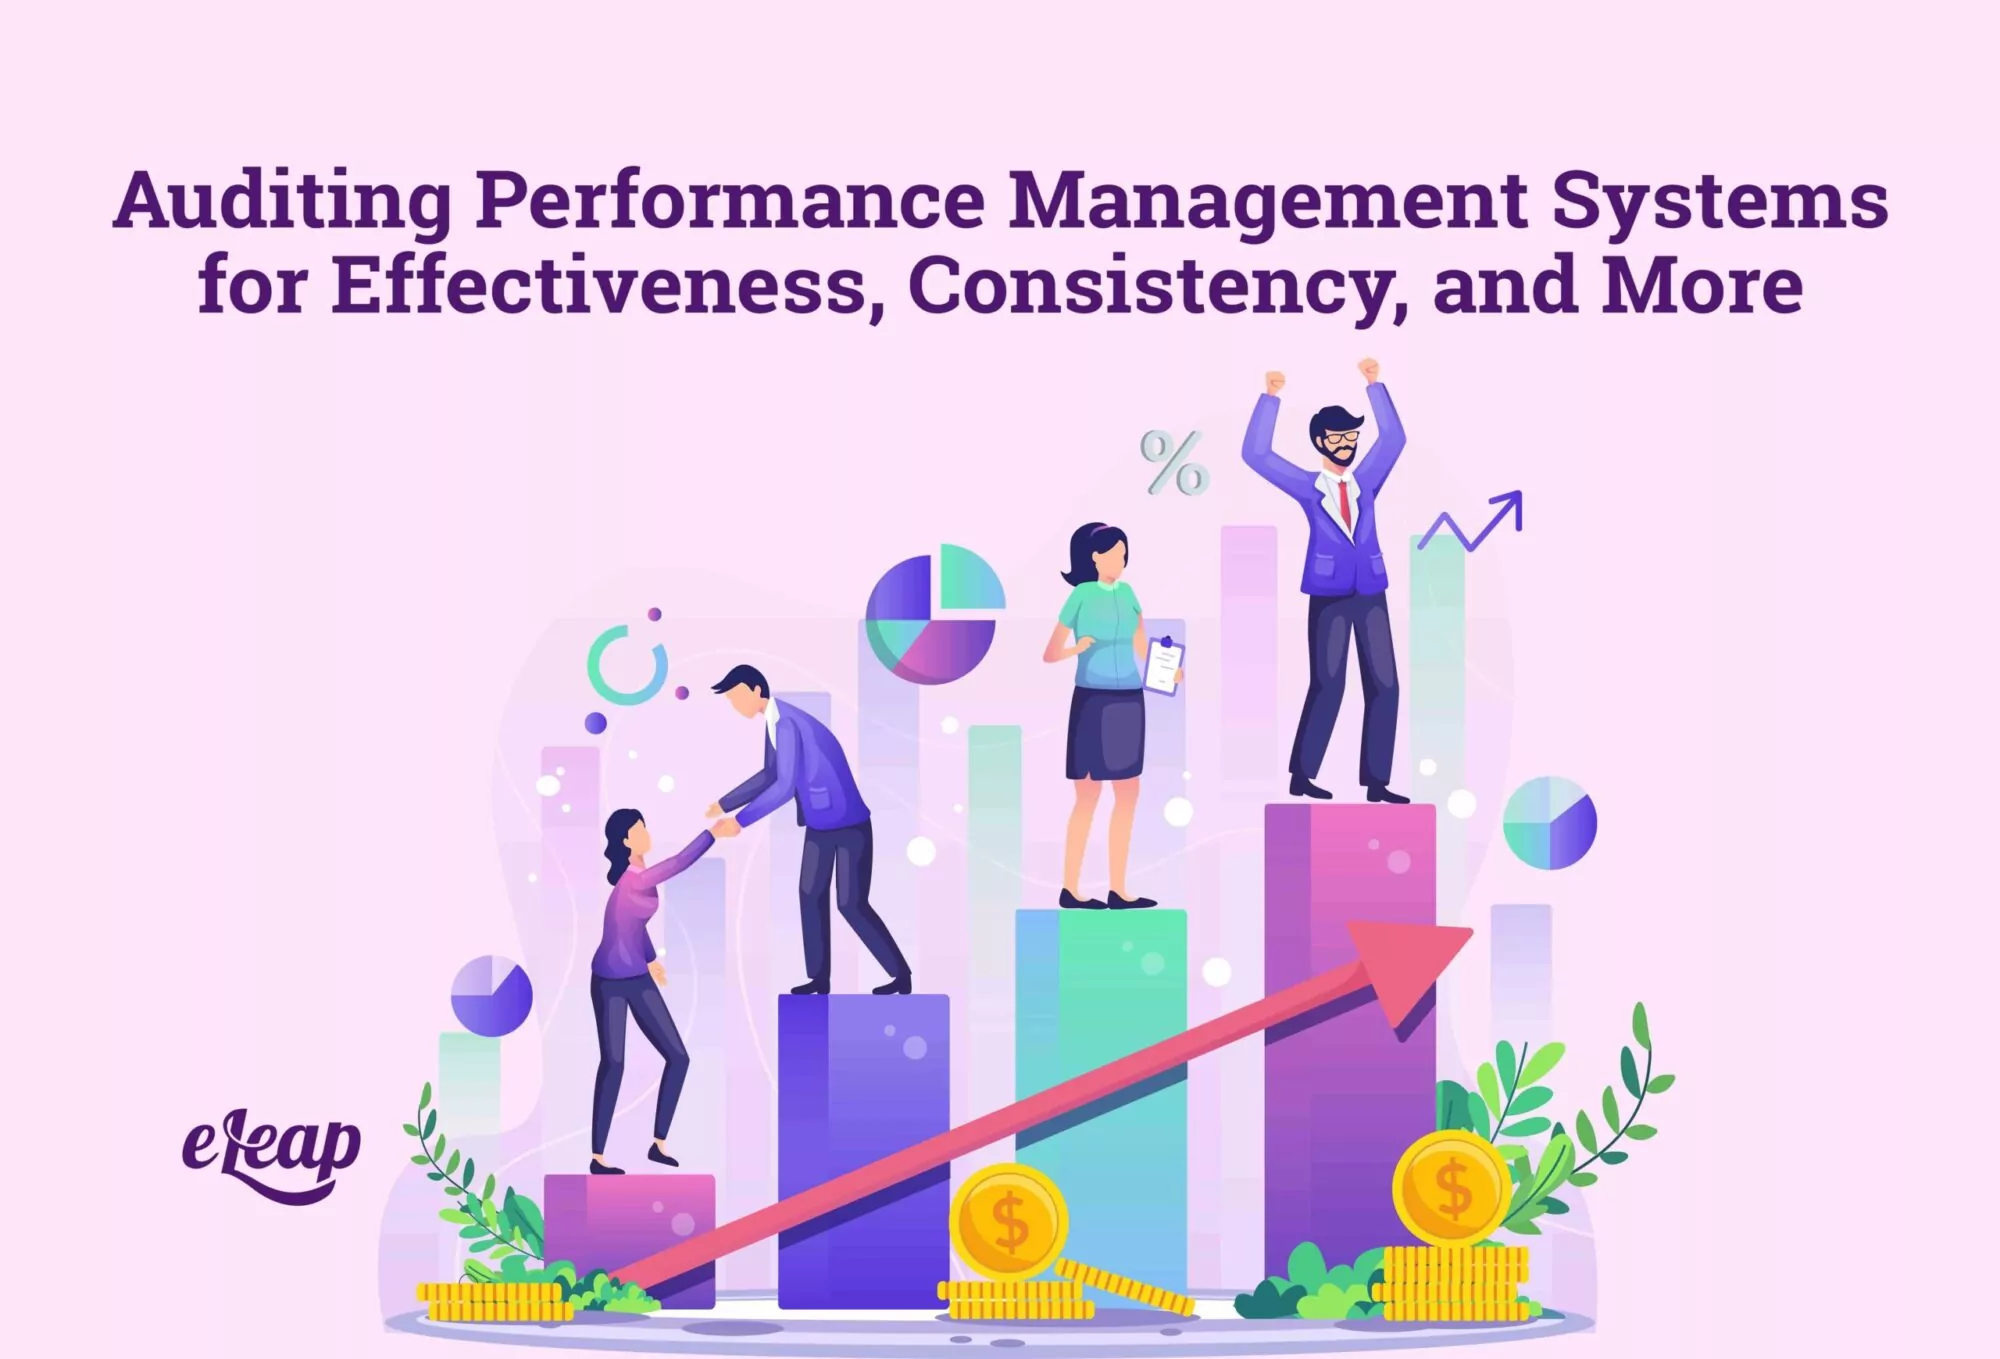 Auditing Performance Management Systems for Effectiveness, Consistency, and More